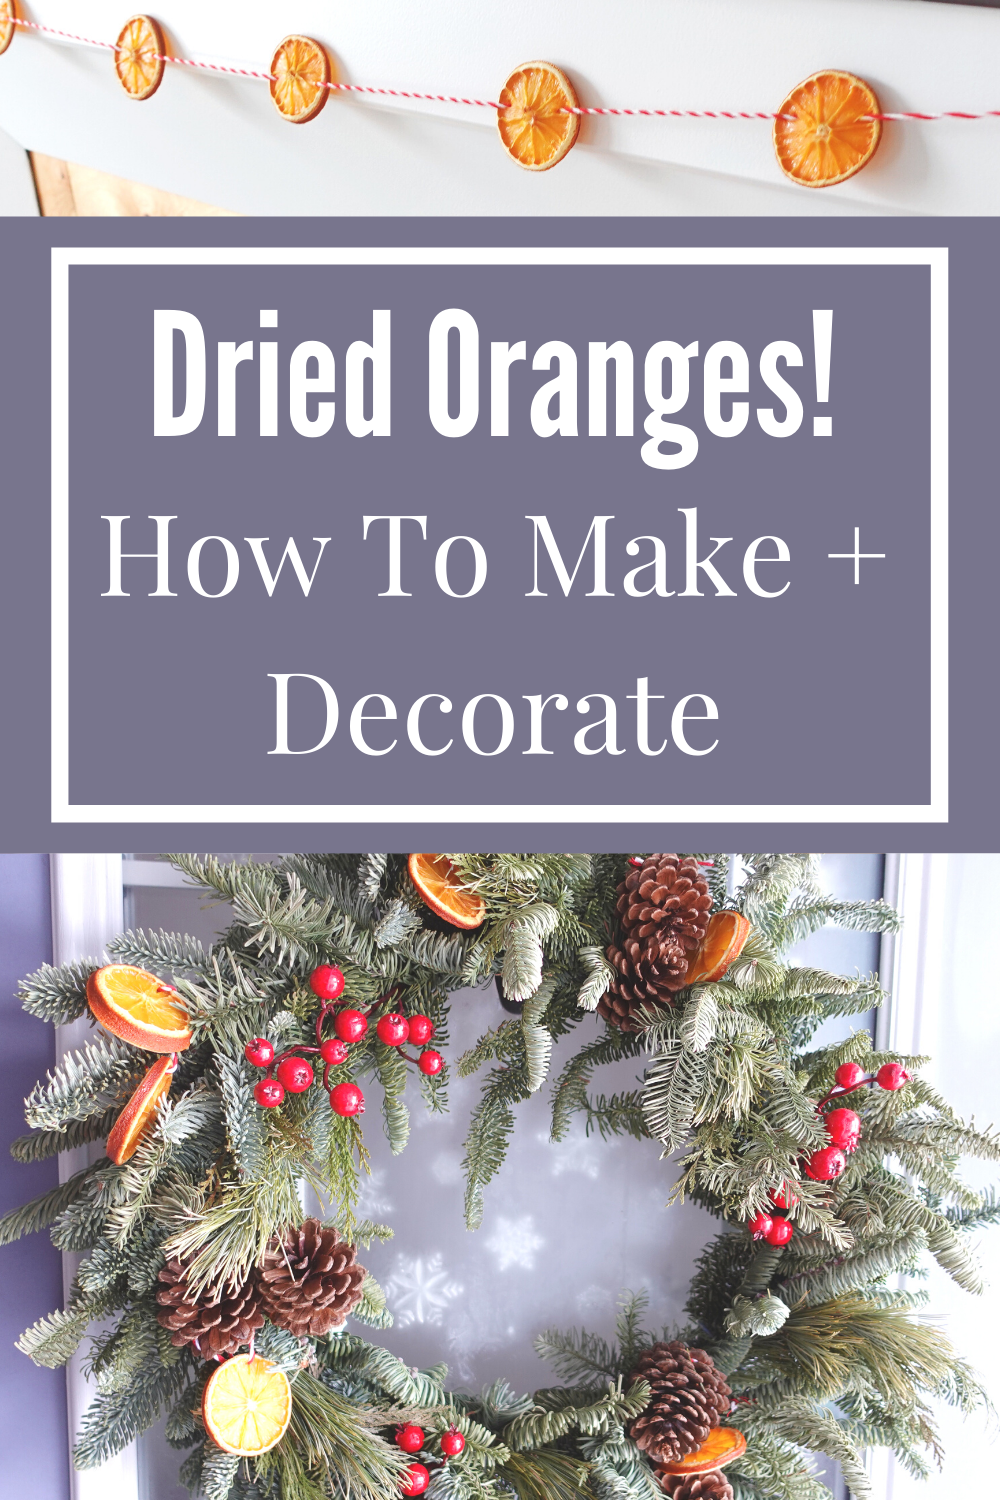 How To Make Dried Orange Ornaments Pinterest pin